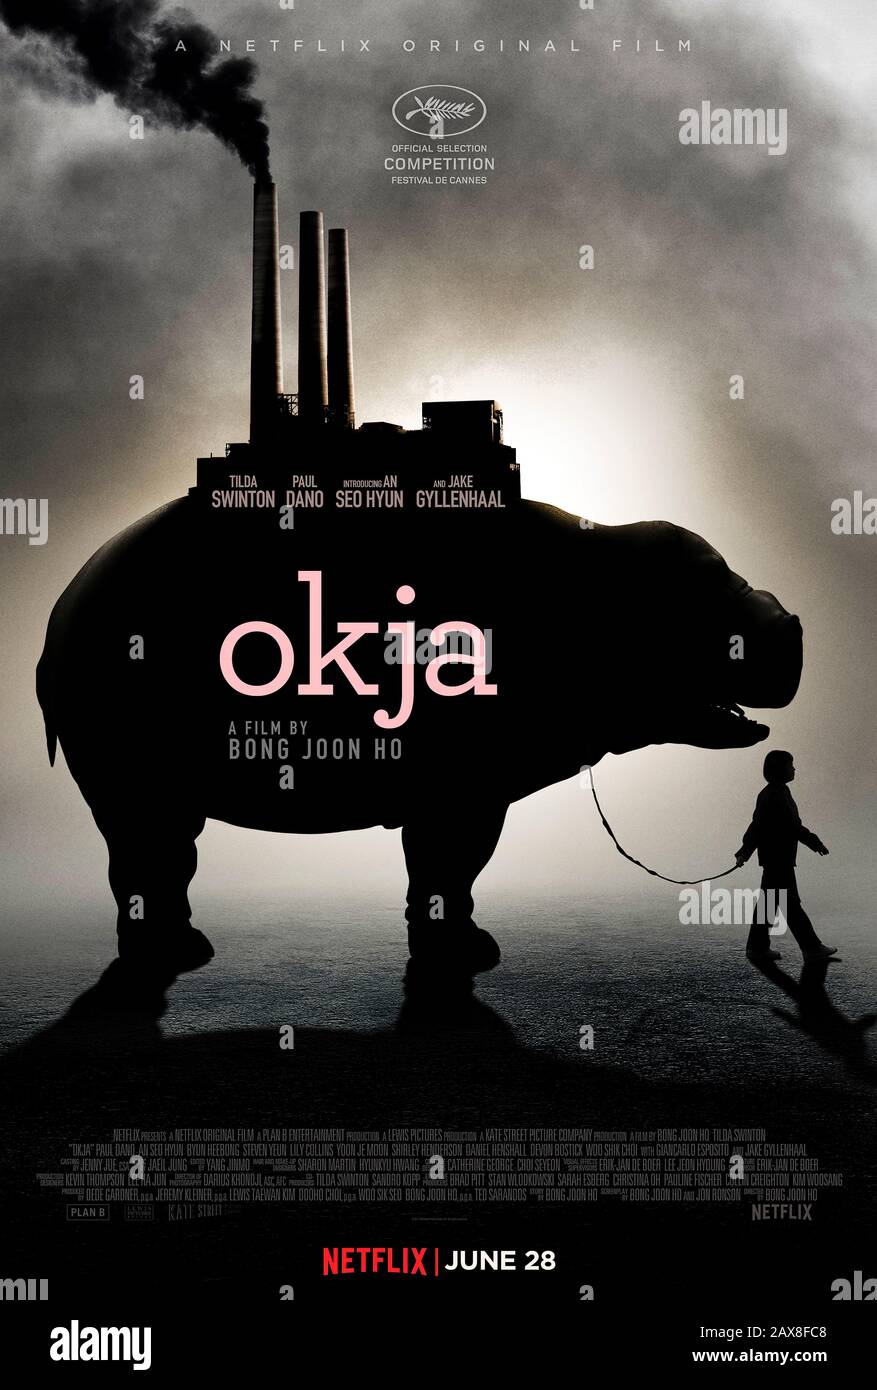 Okja (2017) directed by Bong Joon Ho and starring Tilda Swinton, An Seo Hyun, Paul Dano, Seo-hyun Ahn and Jeong-eun Lee. A young girl befriends a genetically modified superpig breed by the Mirando Corporation and fights to save its life. Stock Photo